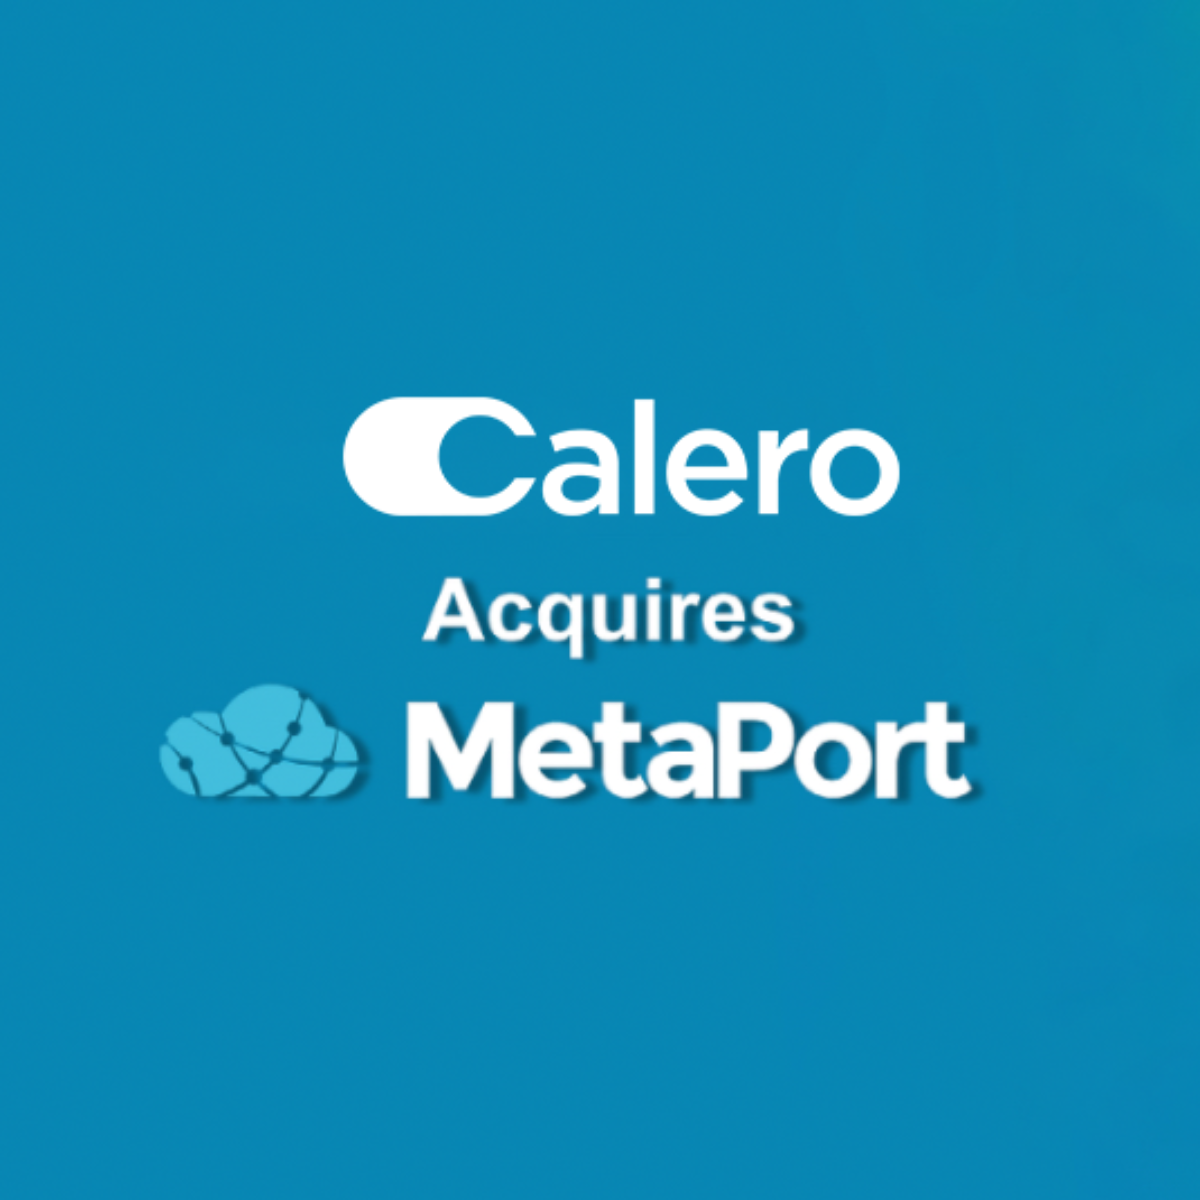 Calero Acquires MetaPort, a Leading Enterprise Network Mapping Software Company, Solidifying Its Commitment to Innovation